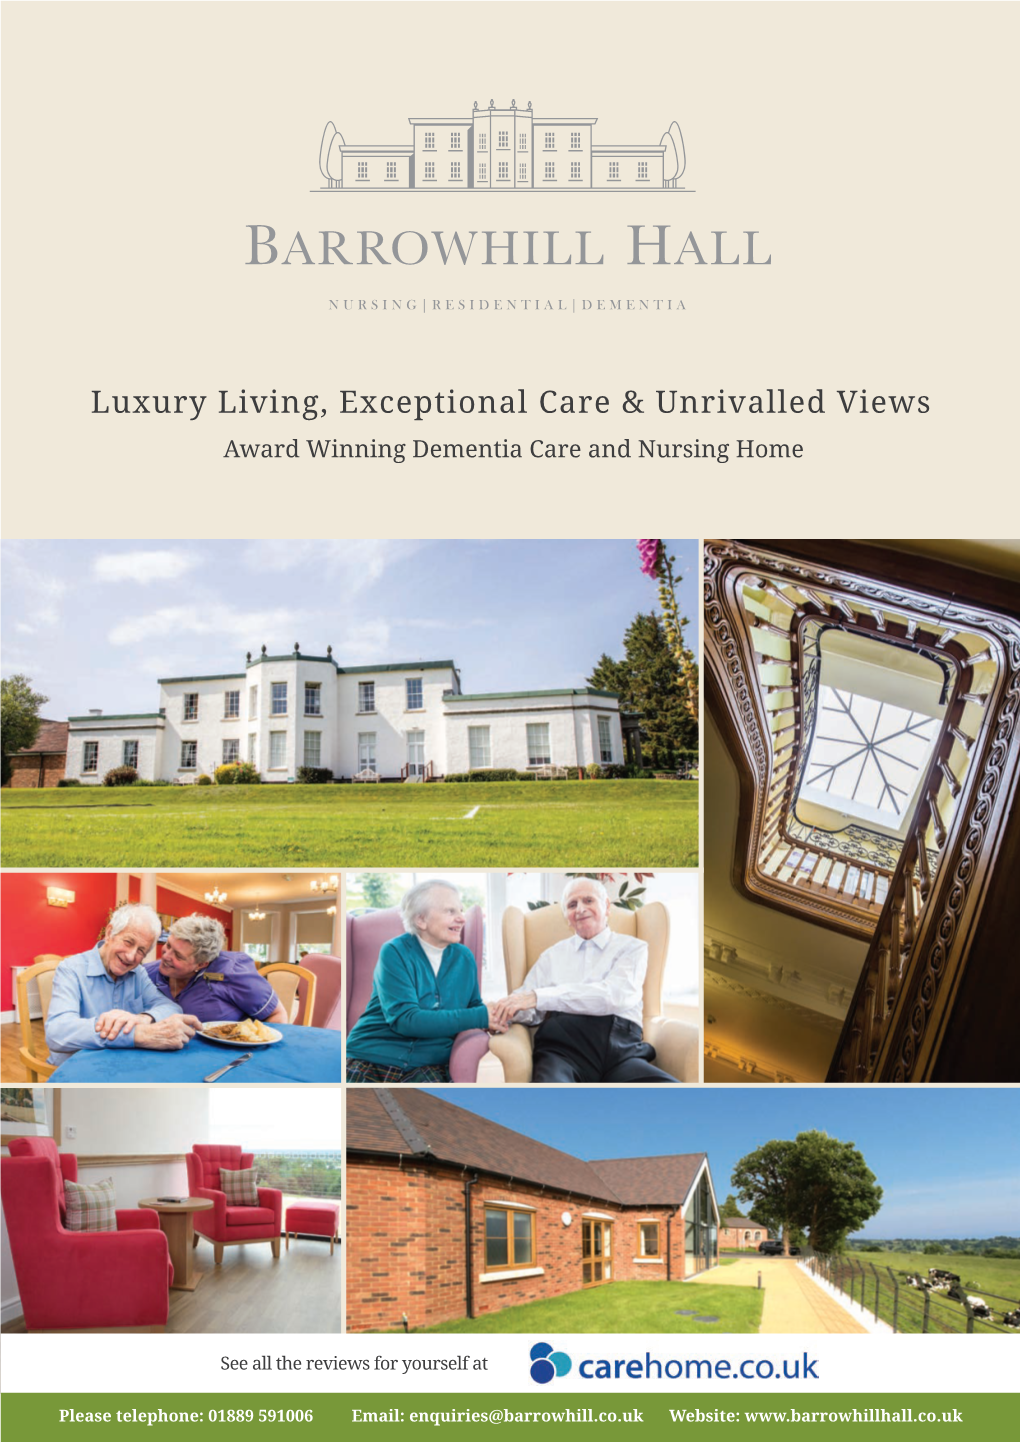 Luxury Living, Exceptional Care & Unrivalled Views